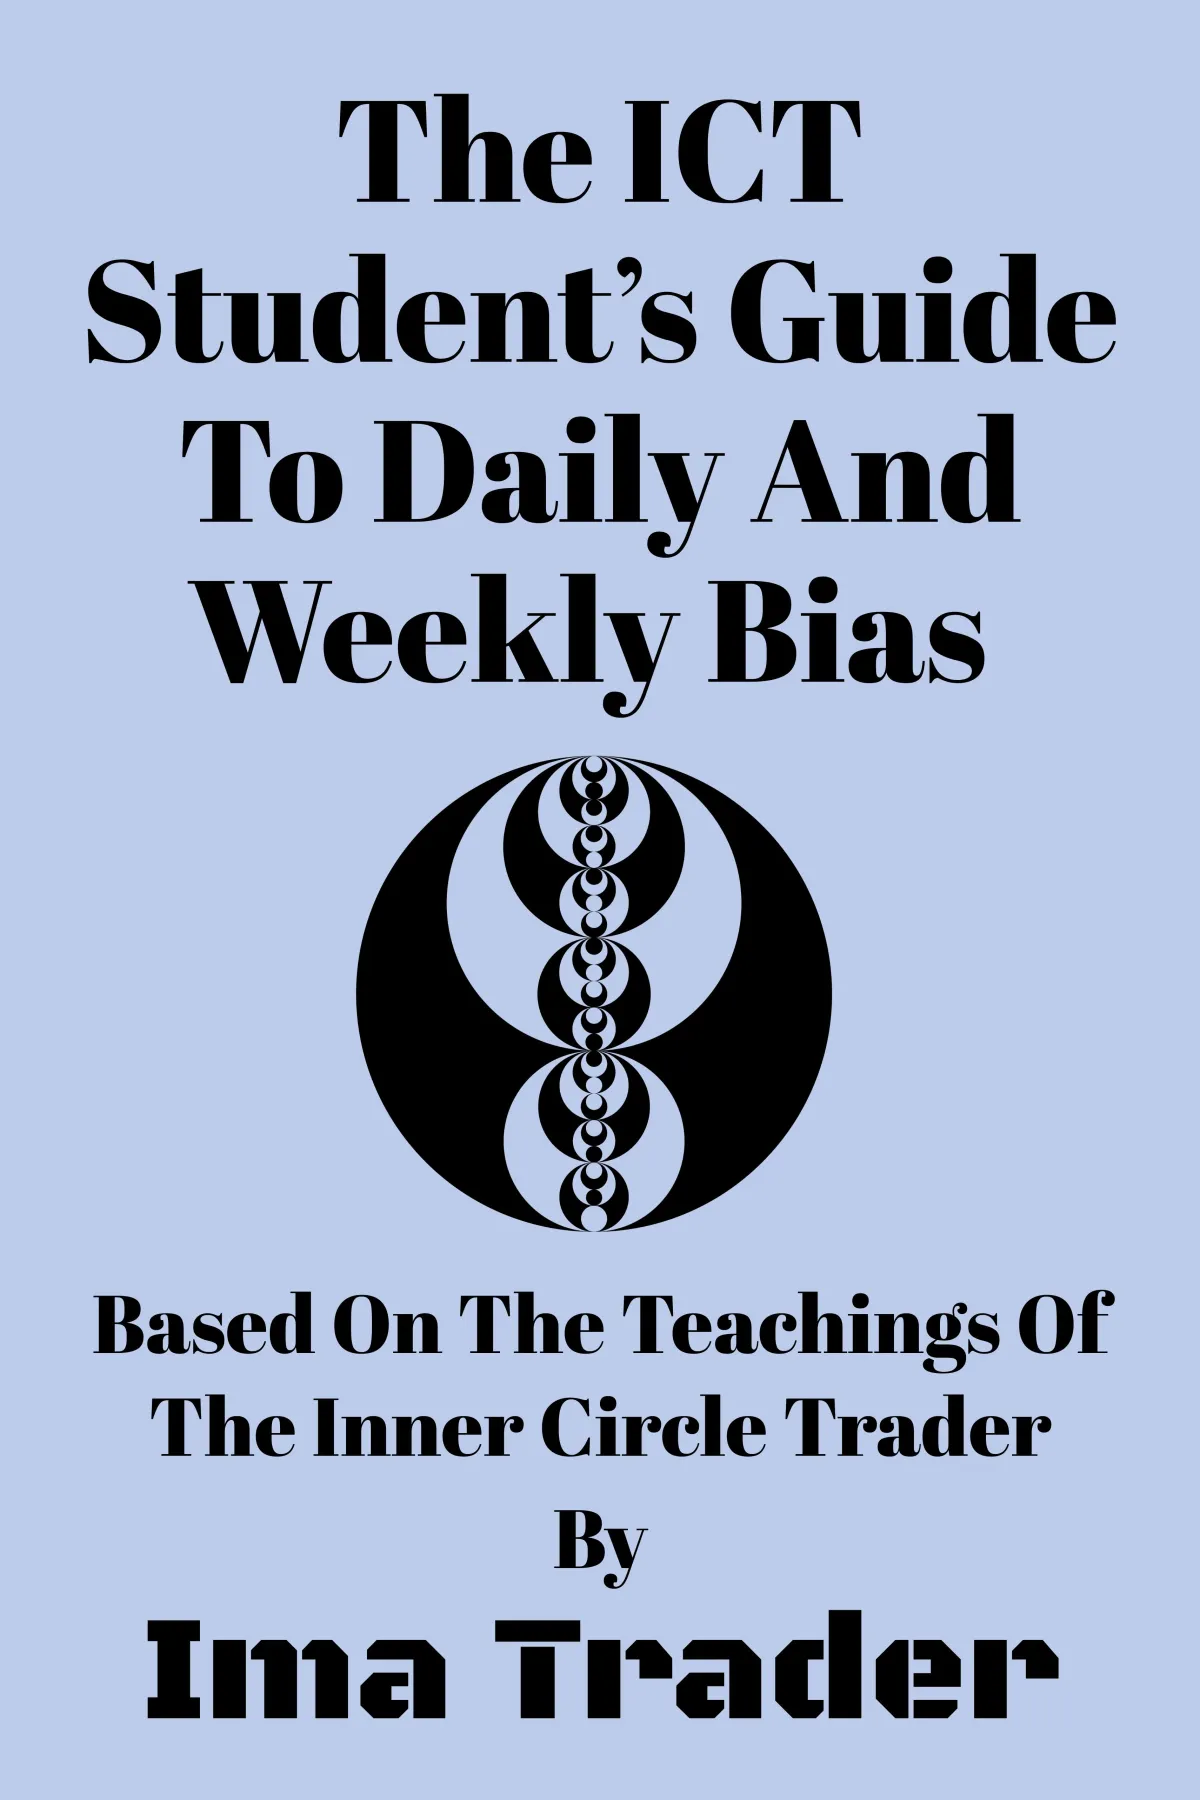 The ICT Student's Guide to Daily and Weekly Bias